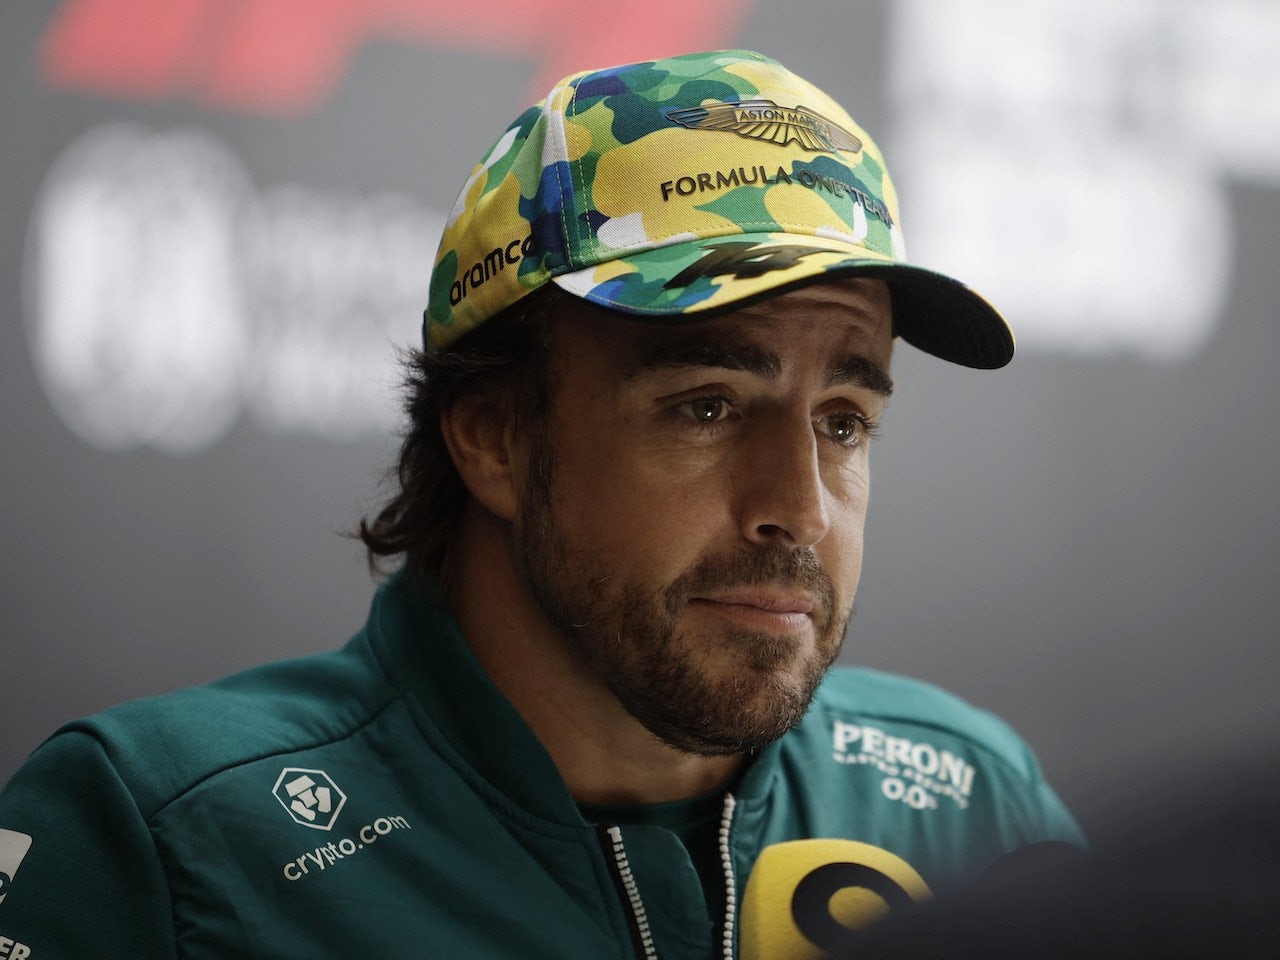 Alonso dropping out of contention for top team move